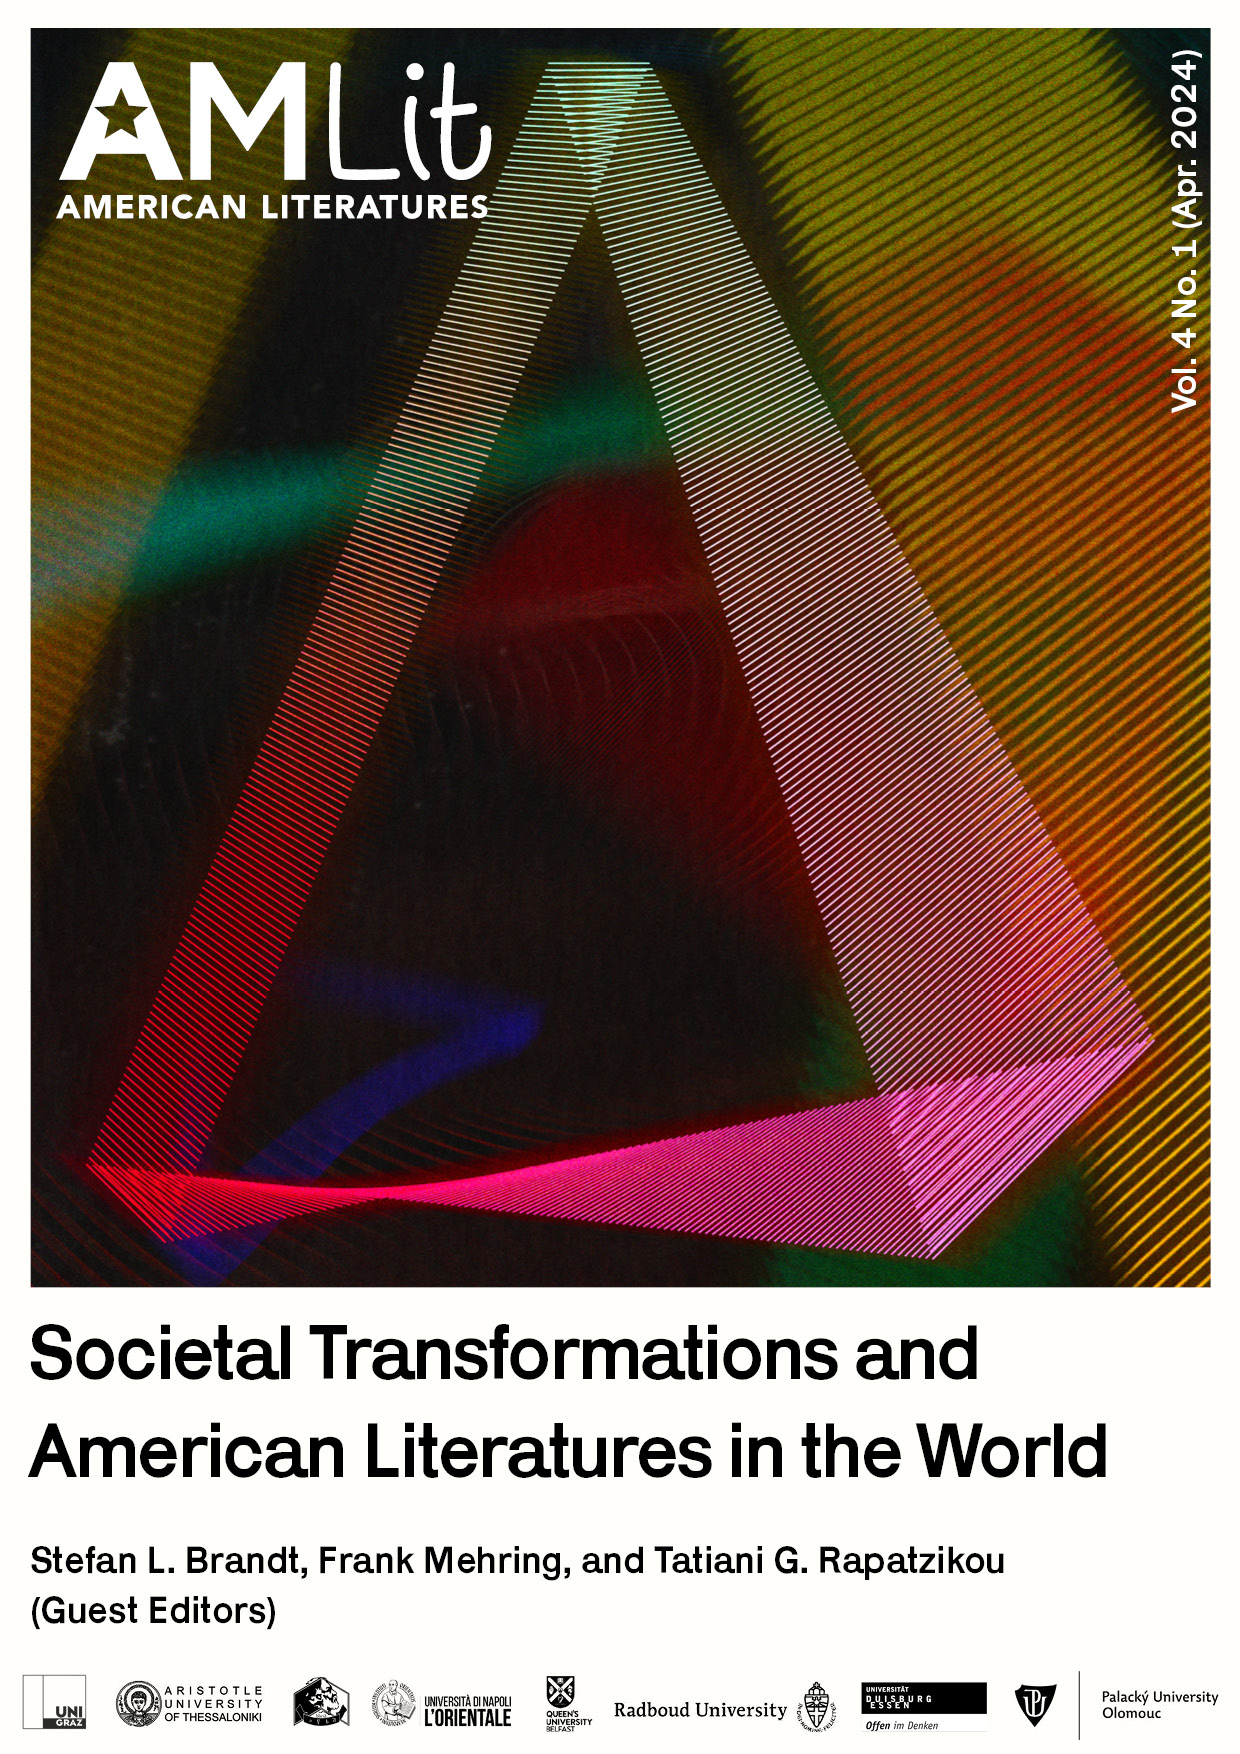 Cover Image of the April 2024 Amlit - American Literatures Issue 4.1 "Societal Transformations and American Literatures in the World.""